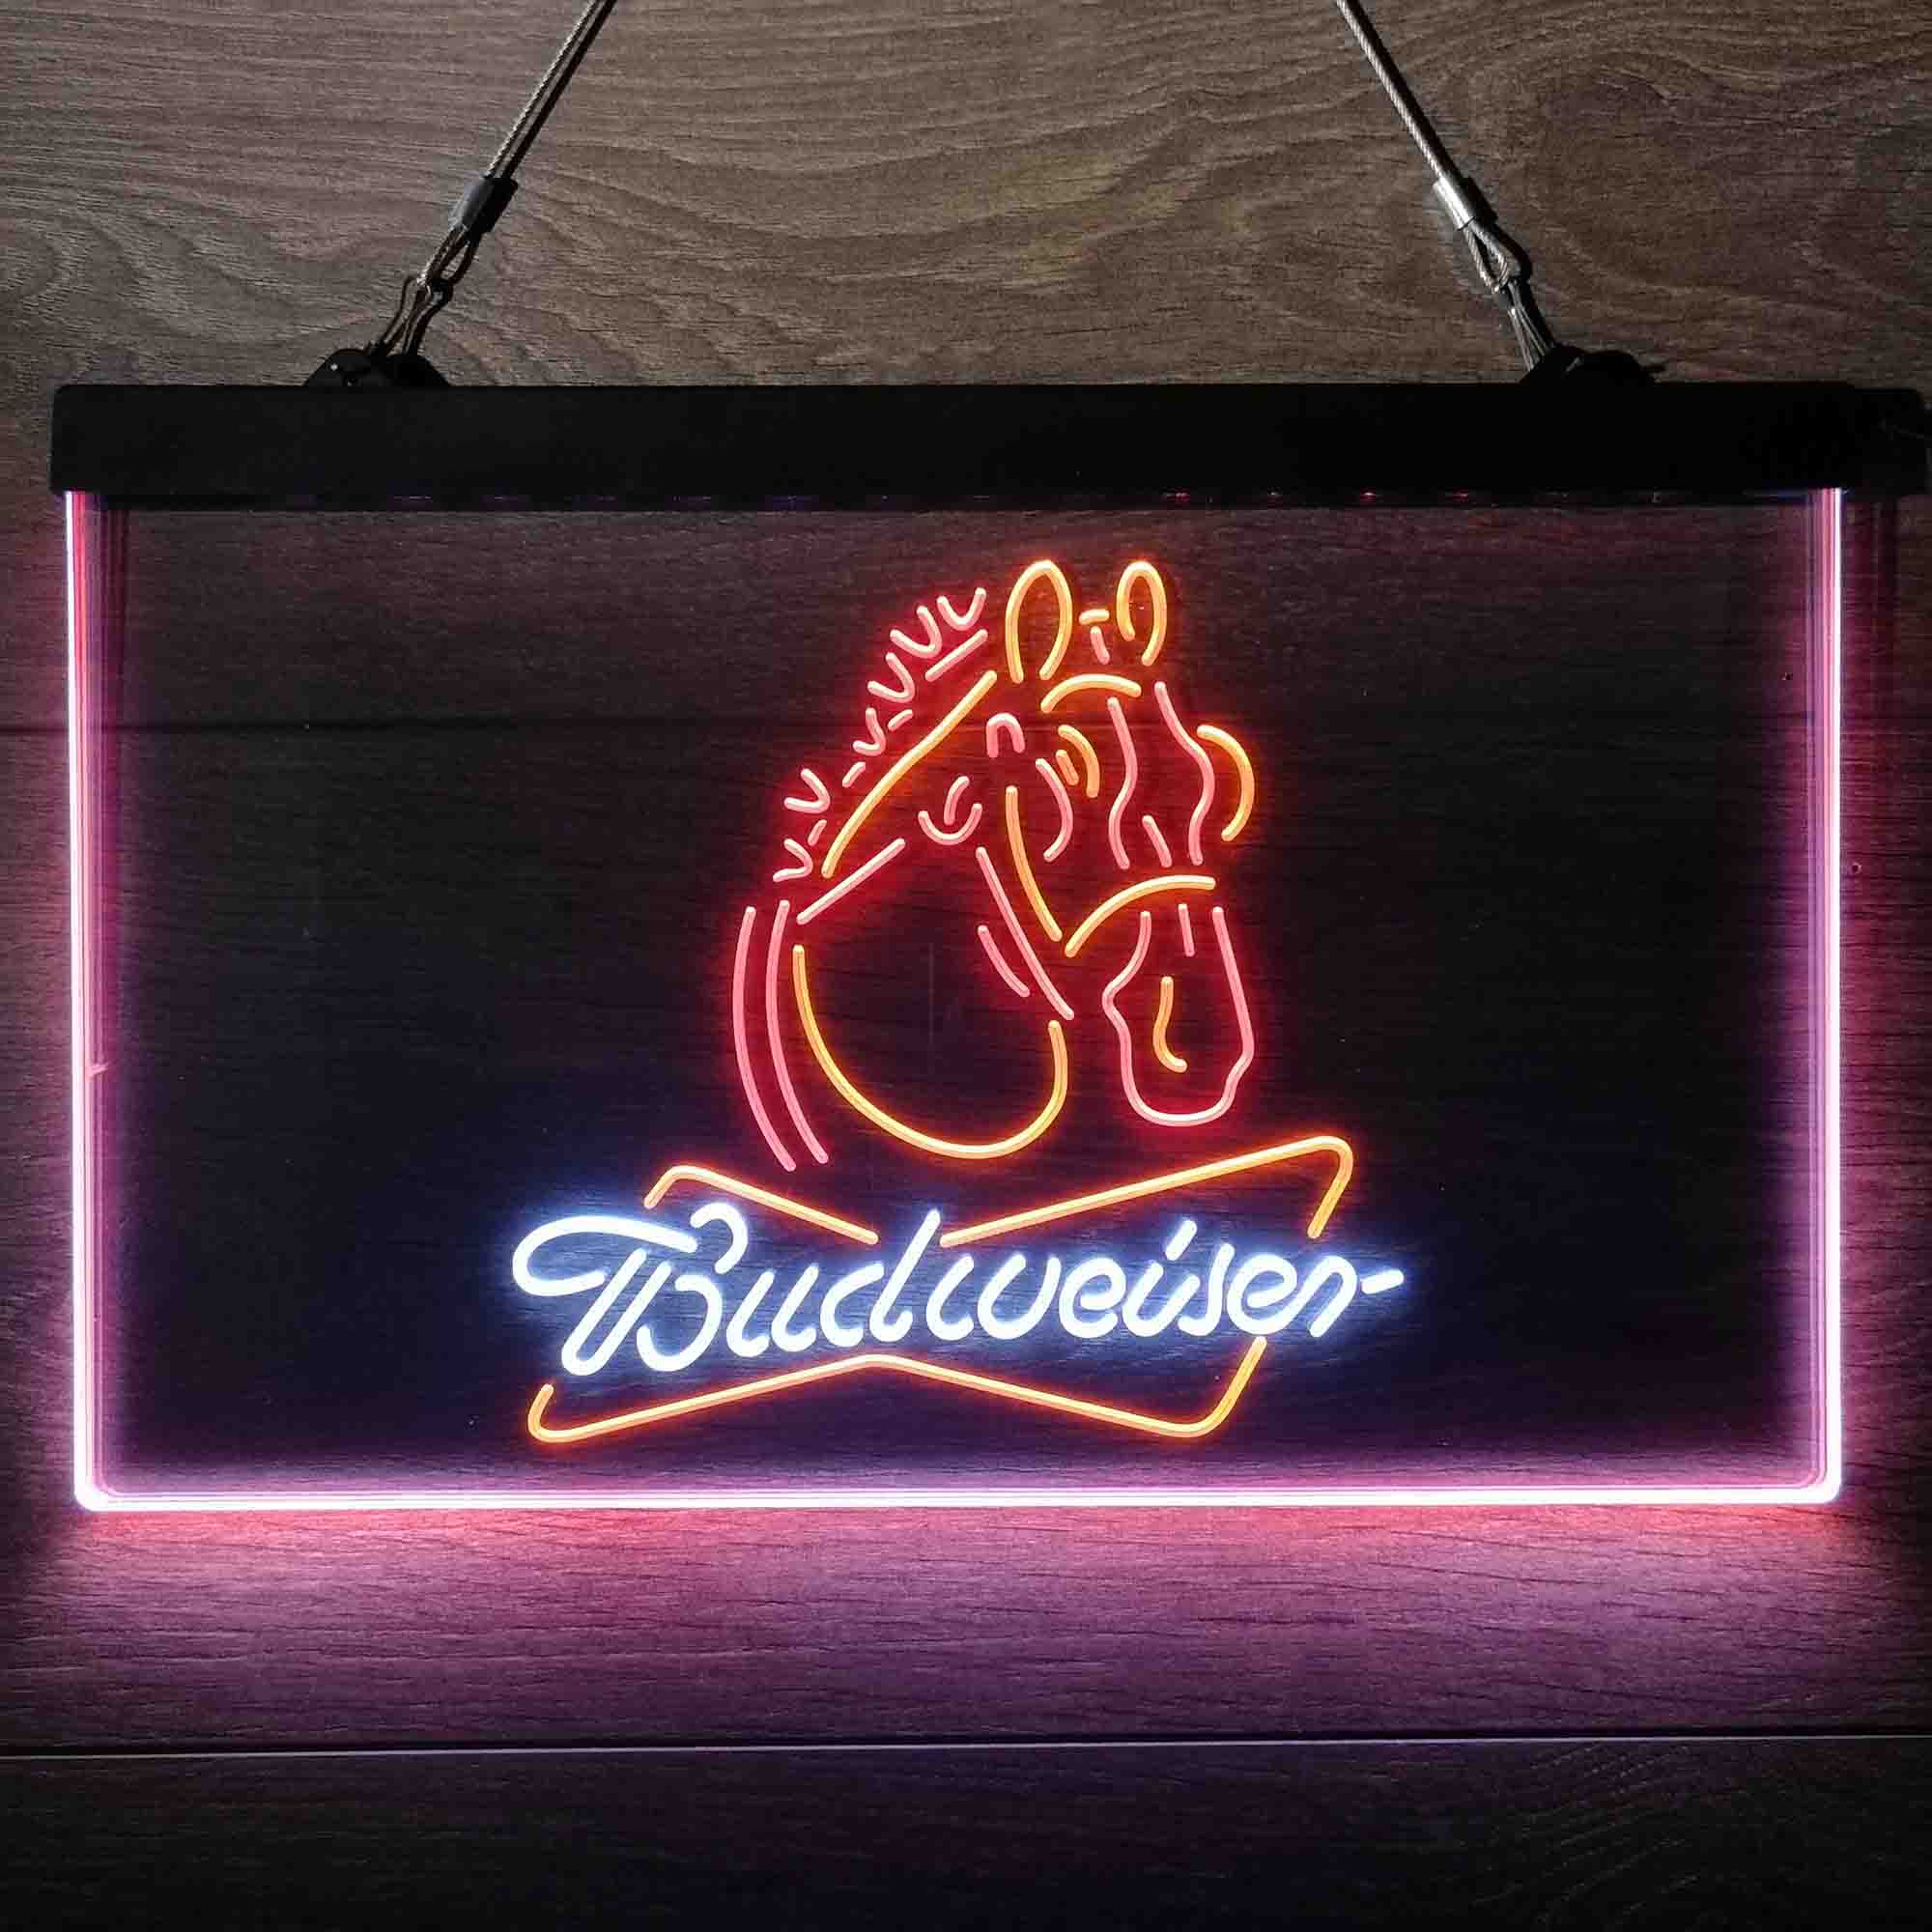 Budweiser Clydesdale Horse Head Neon 3-Color LED Sign